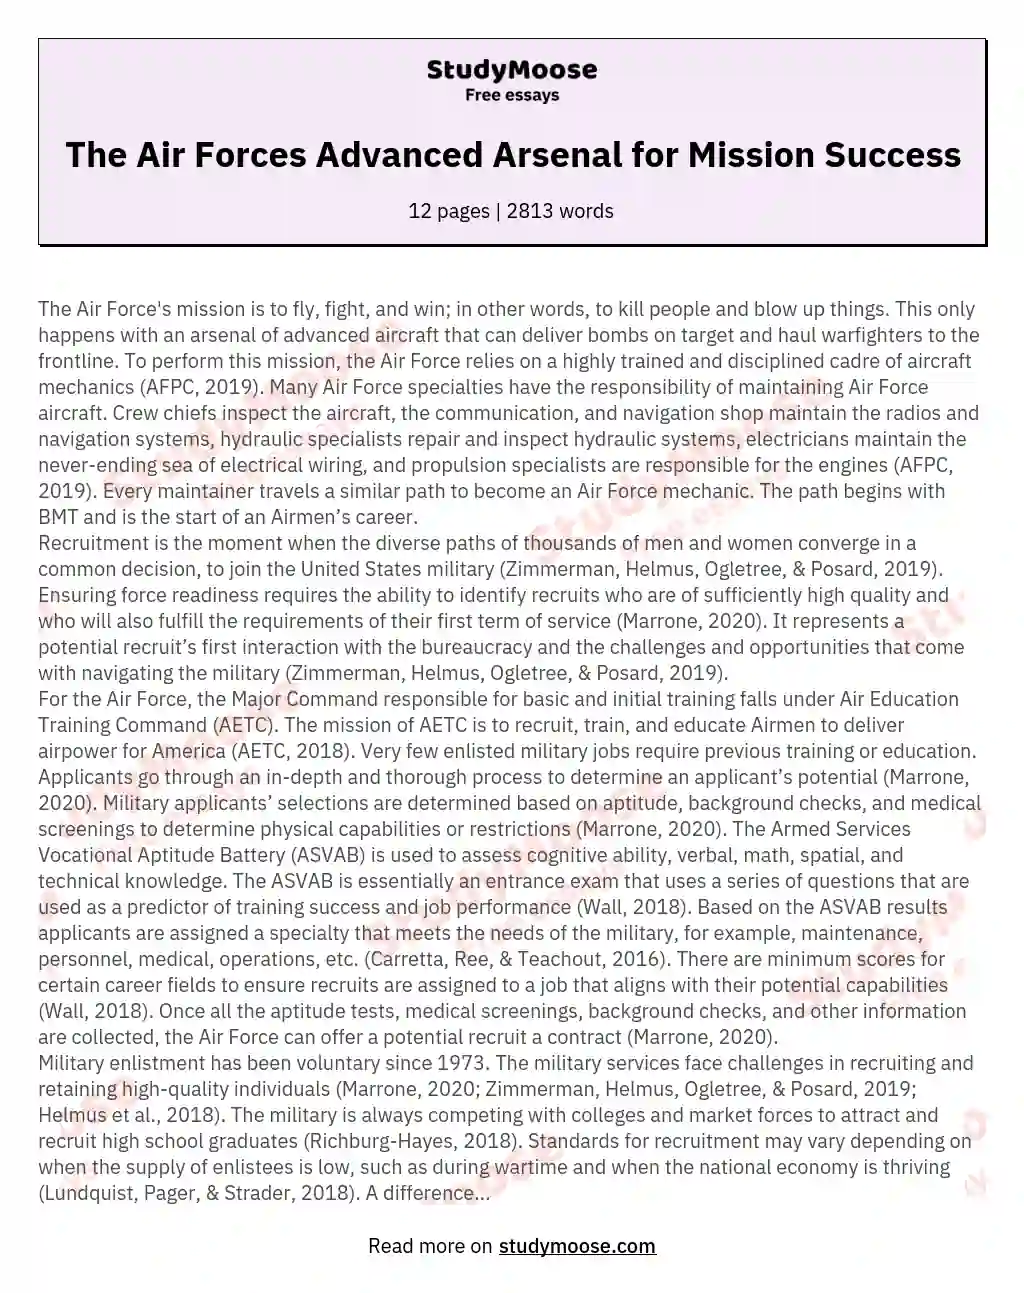 The Air Forces Advanced Arsenal for Mission Success essay